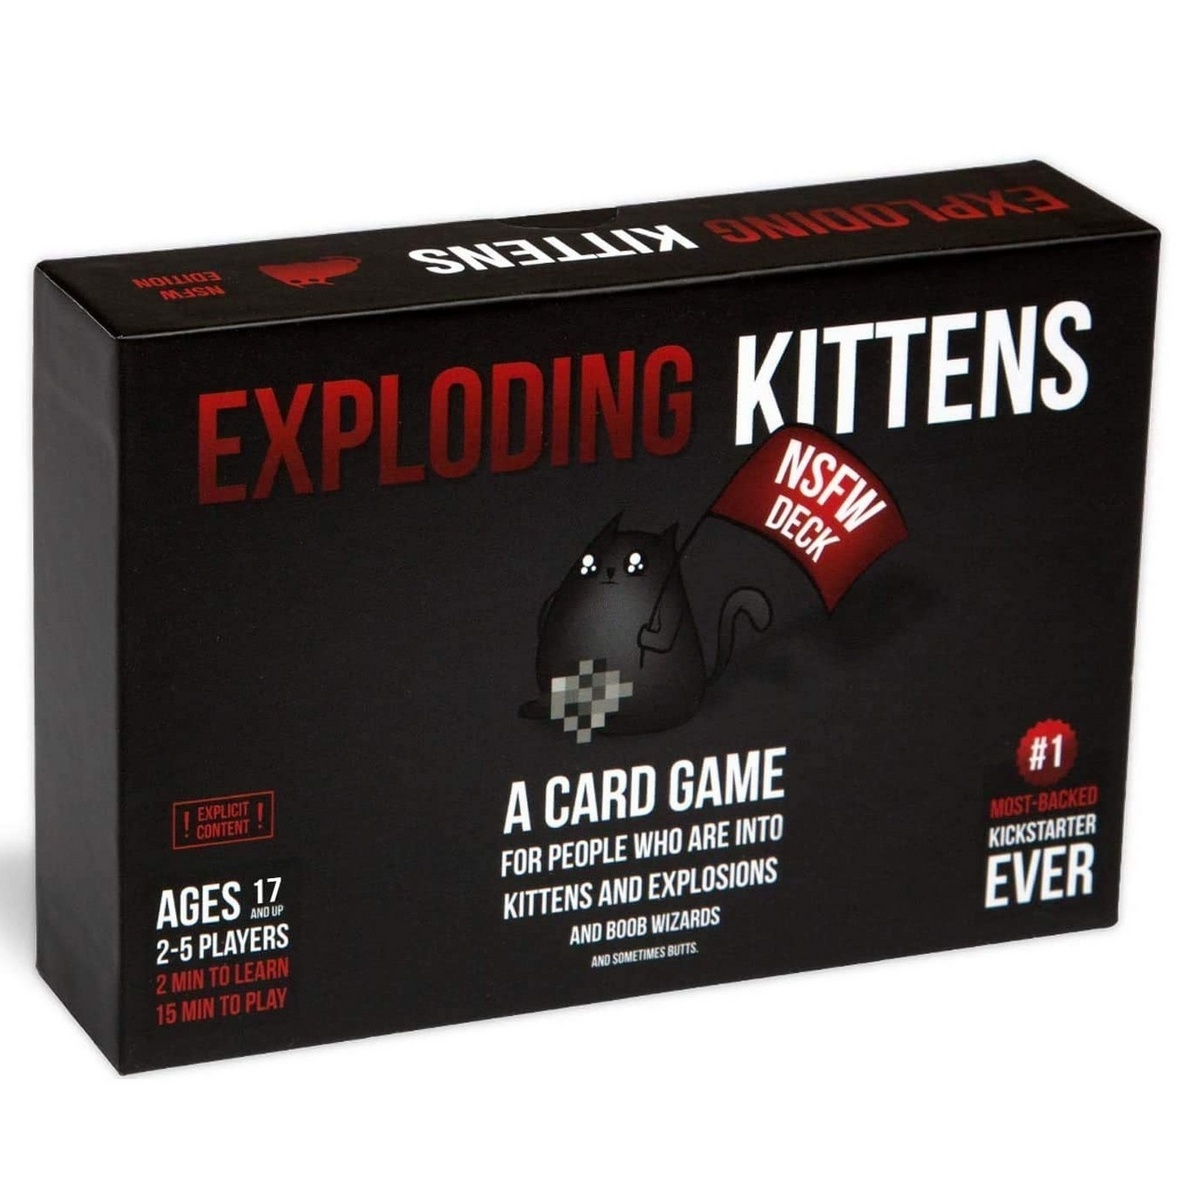 Exploding Kittens - NSWF Edition Card Game (English)